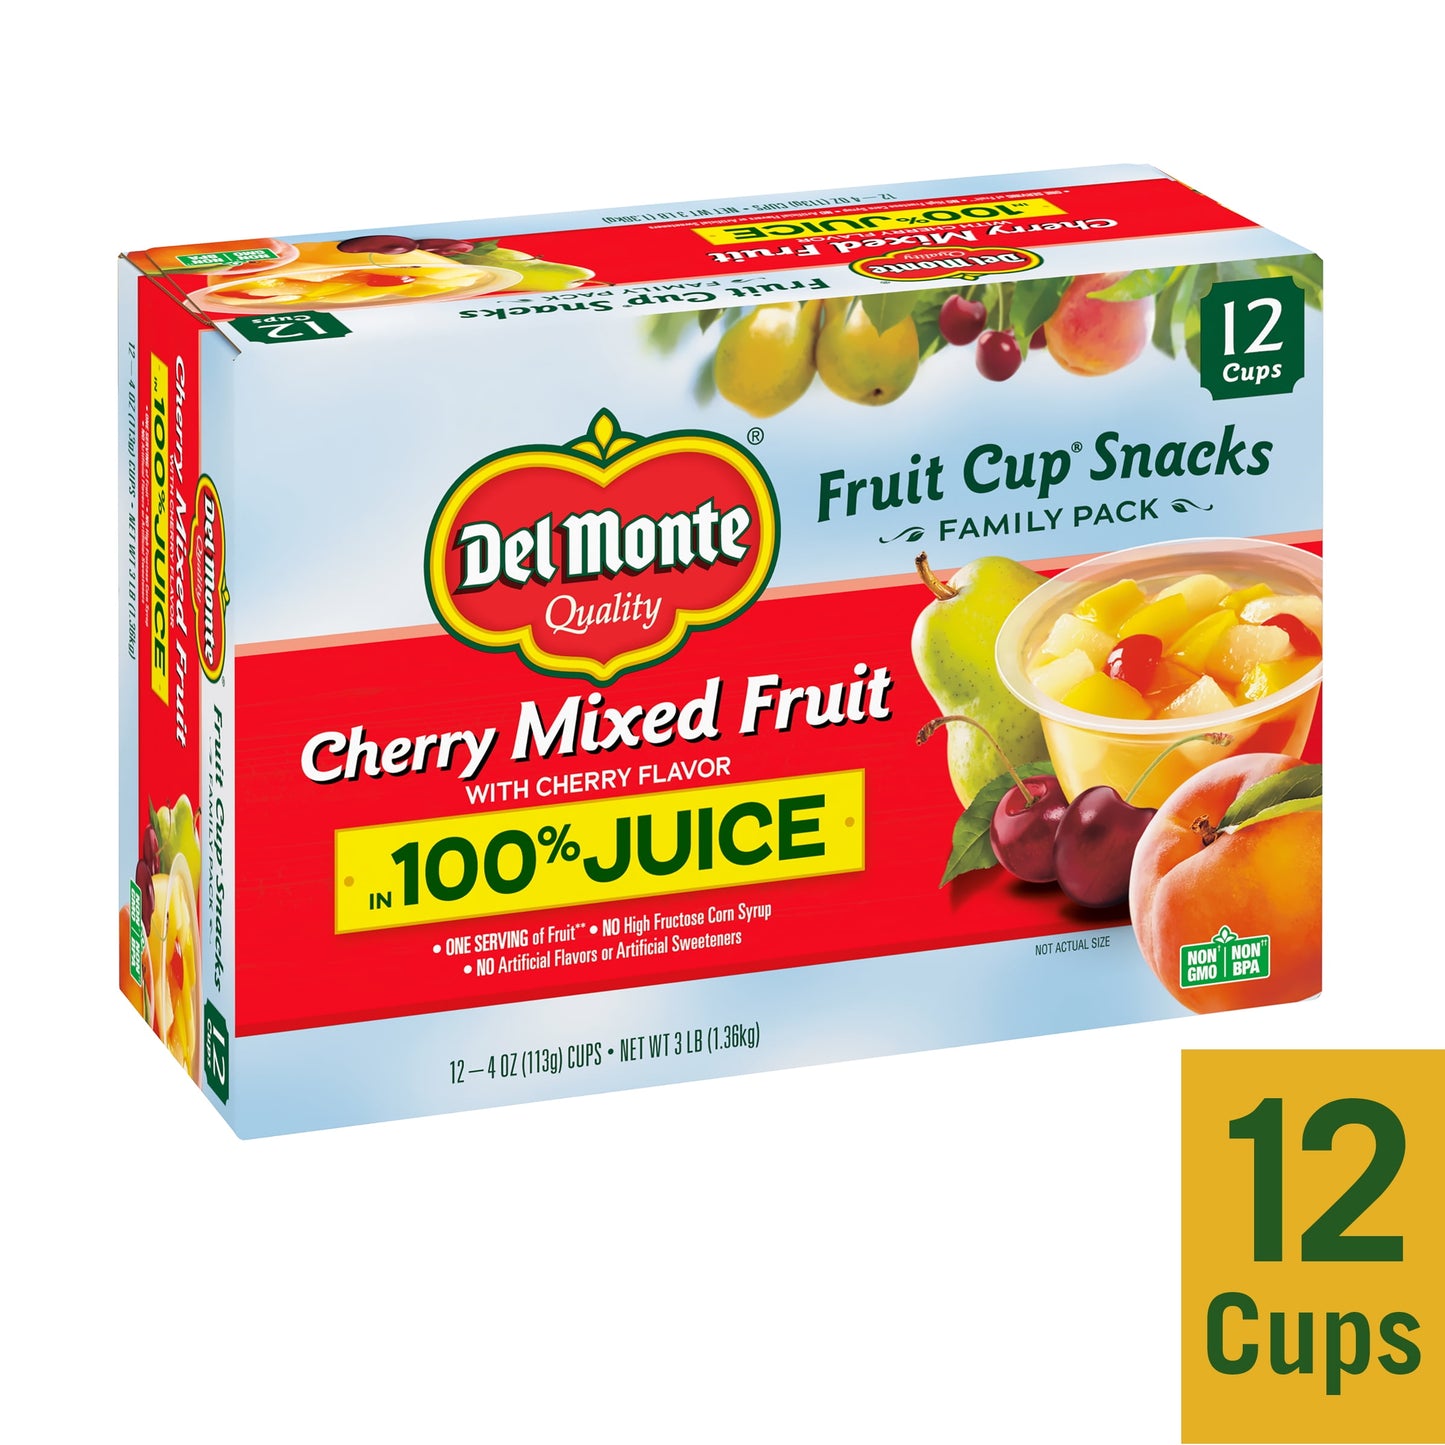 (12 Cups)  Cherry Mixed Fruit Cup Snacks in 100% Juice, 4 Oz